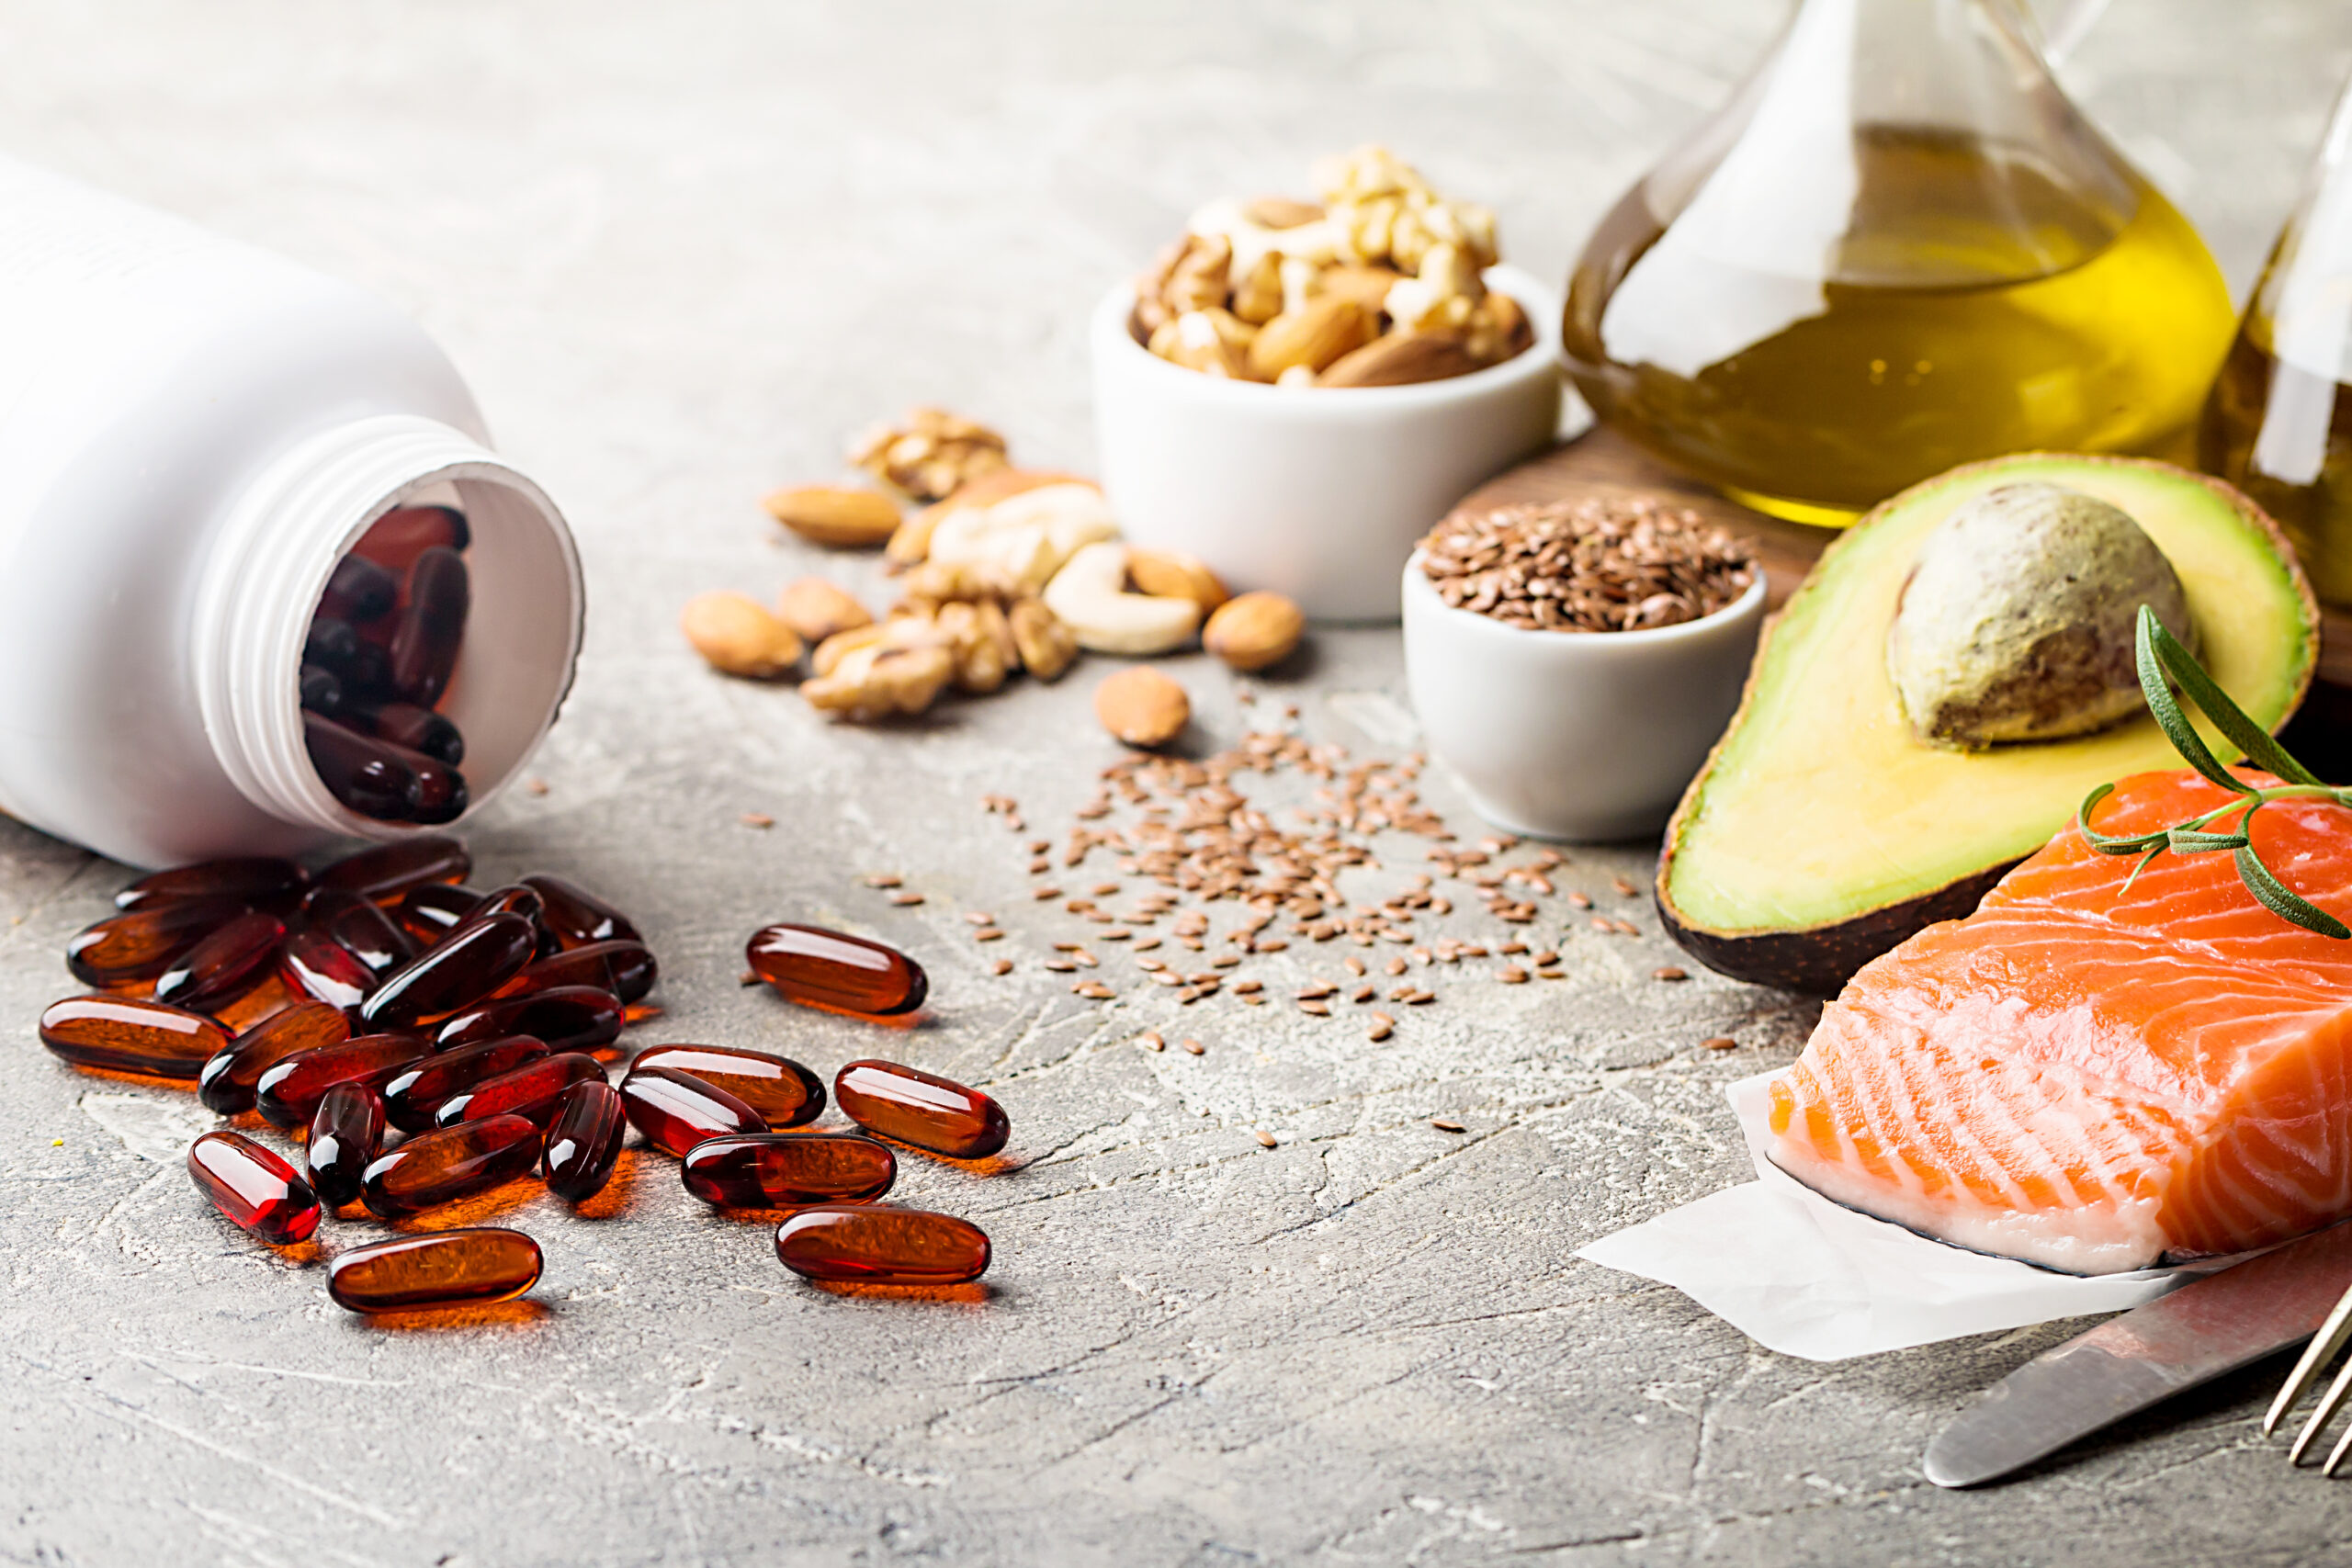 b vitamins and healthy foods with omega-3 fats which can support mental health and brain health